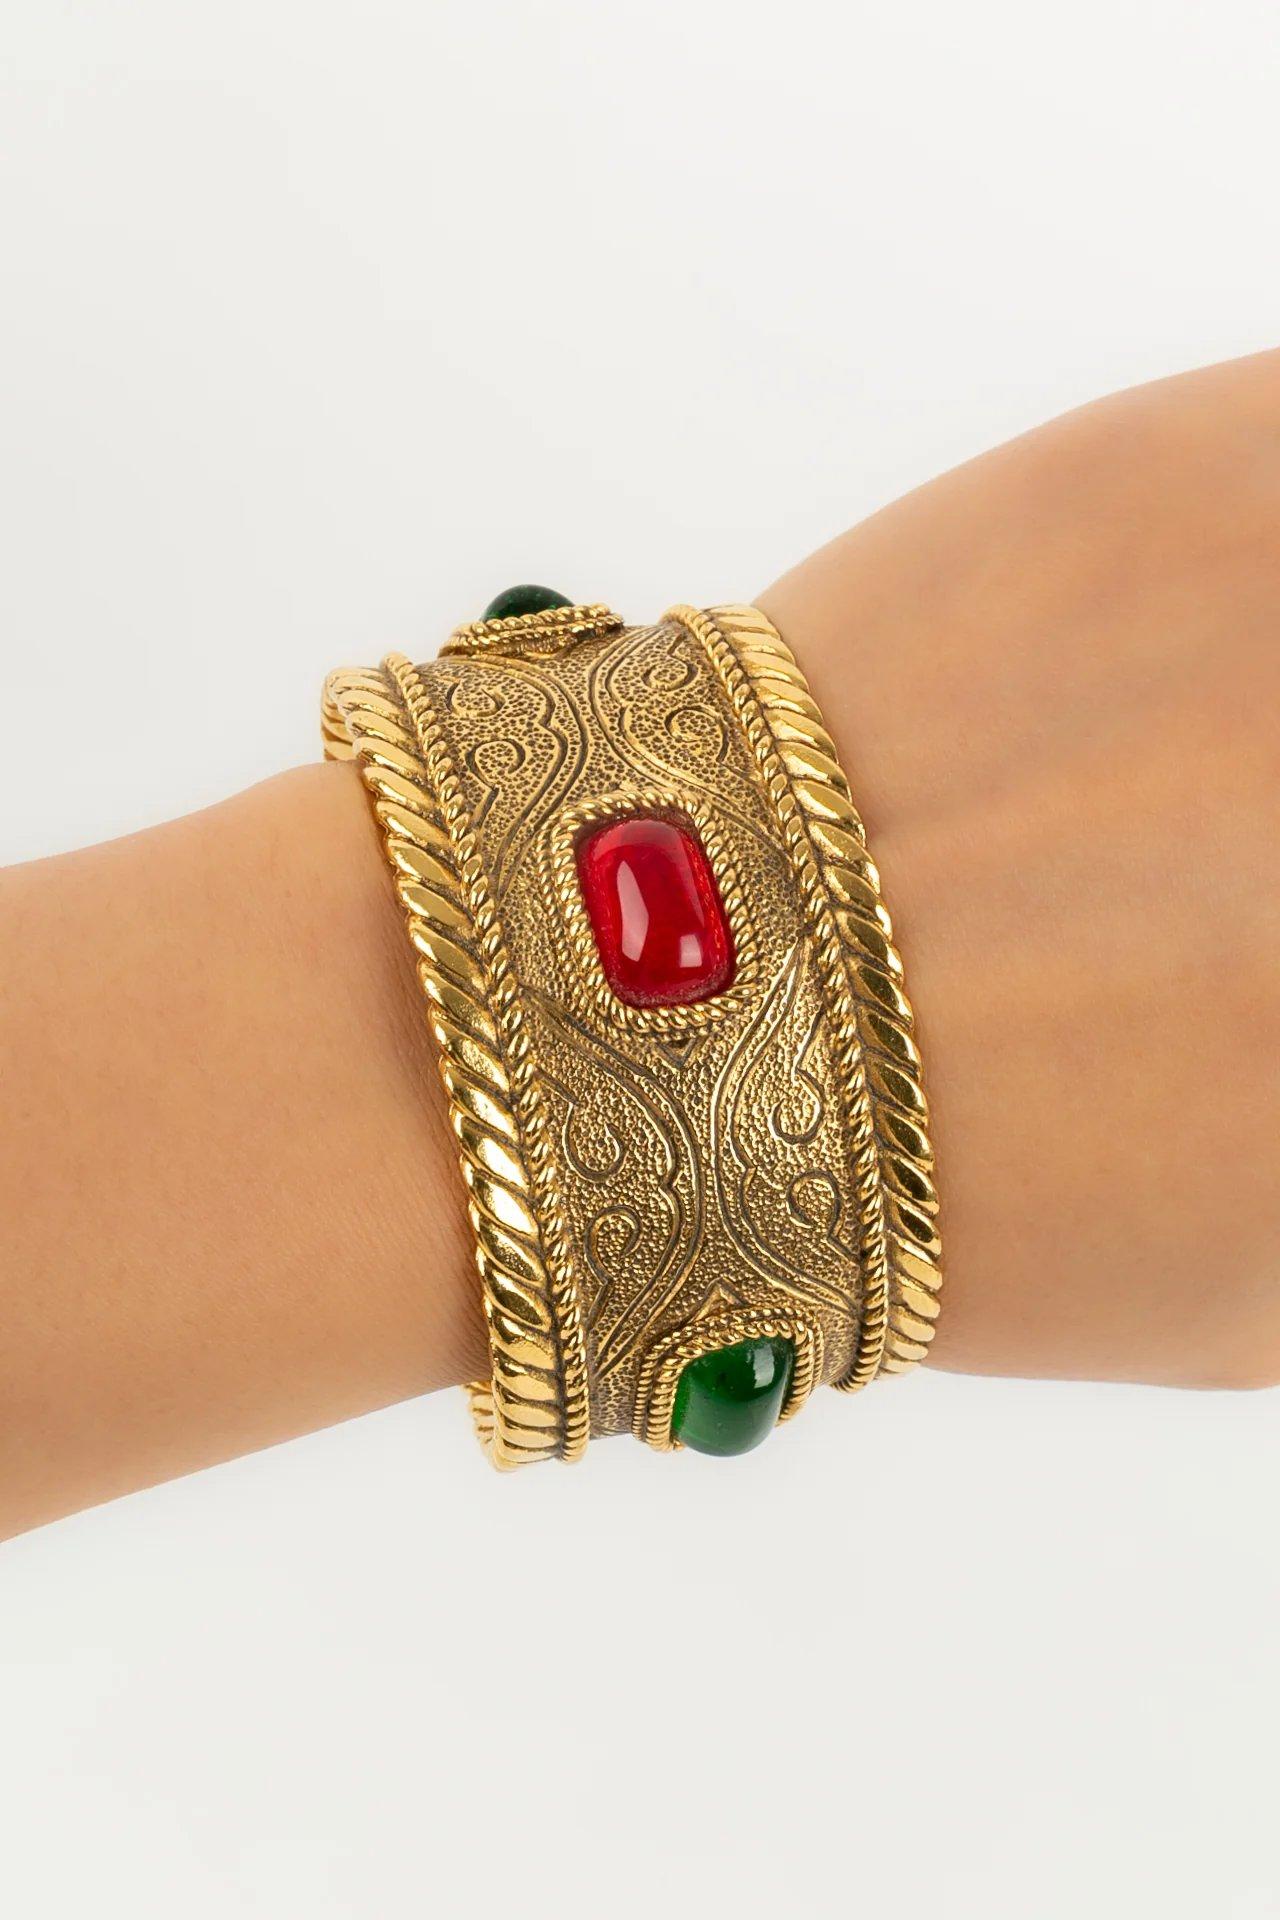 Chanel - (Made in France) Bracelet in gilded metal and cabochons in glass paste. Collection 1985.

Additional information:
Dimensions: Circumference: 14.5 cm 
Opening: 3 cm 
Width: 3.5 cm
Condition: Very good condition
Seller Ref number: BRAB51